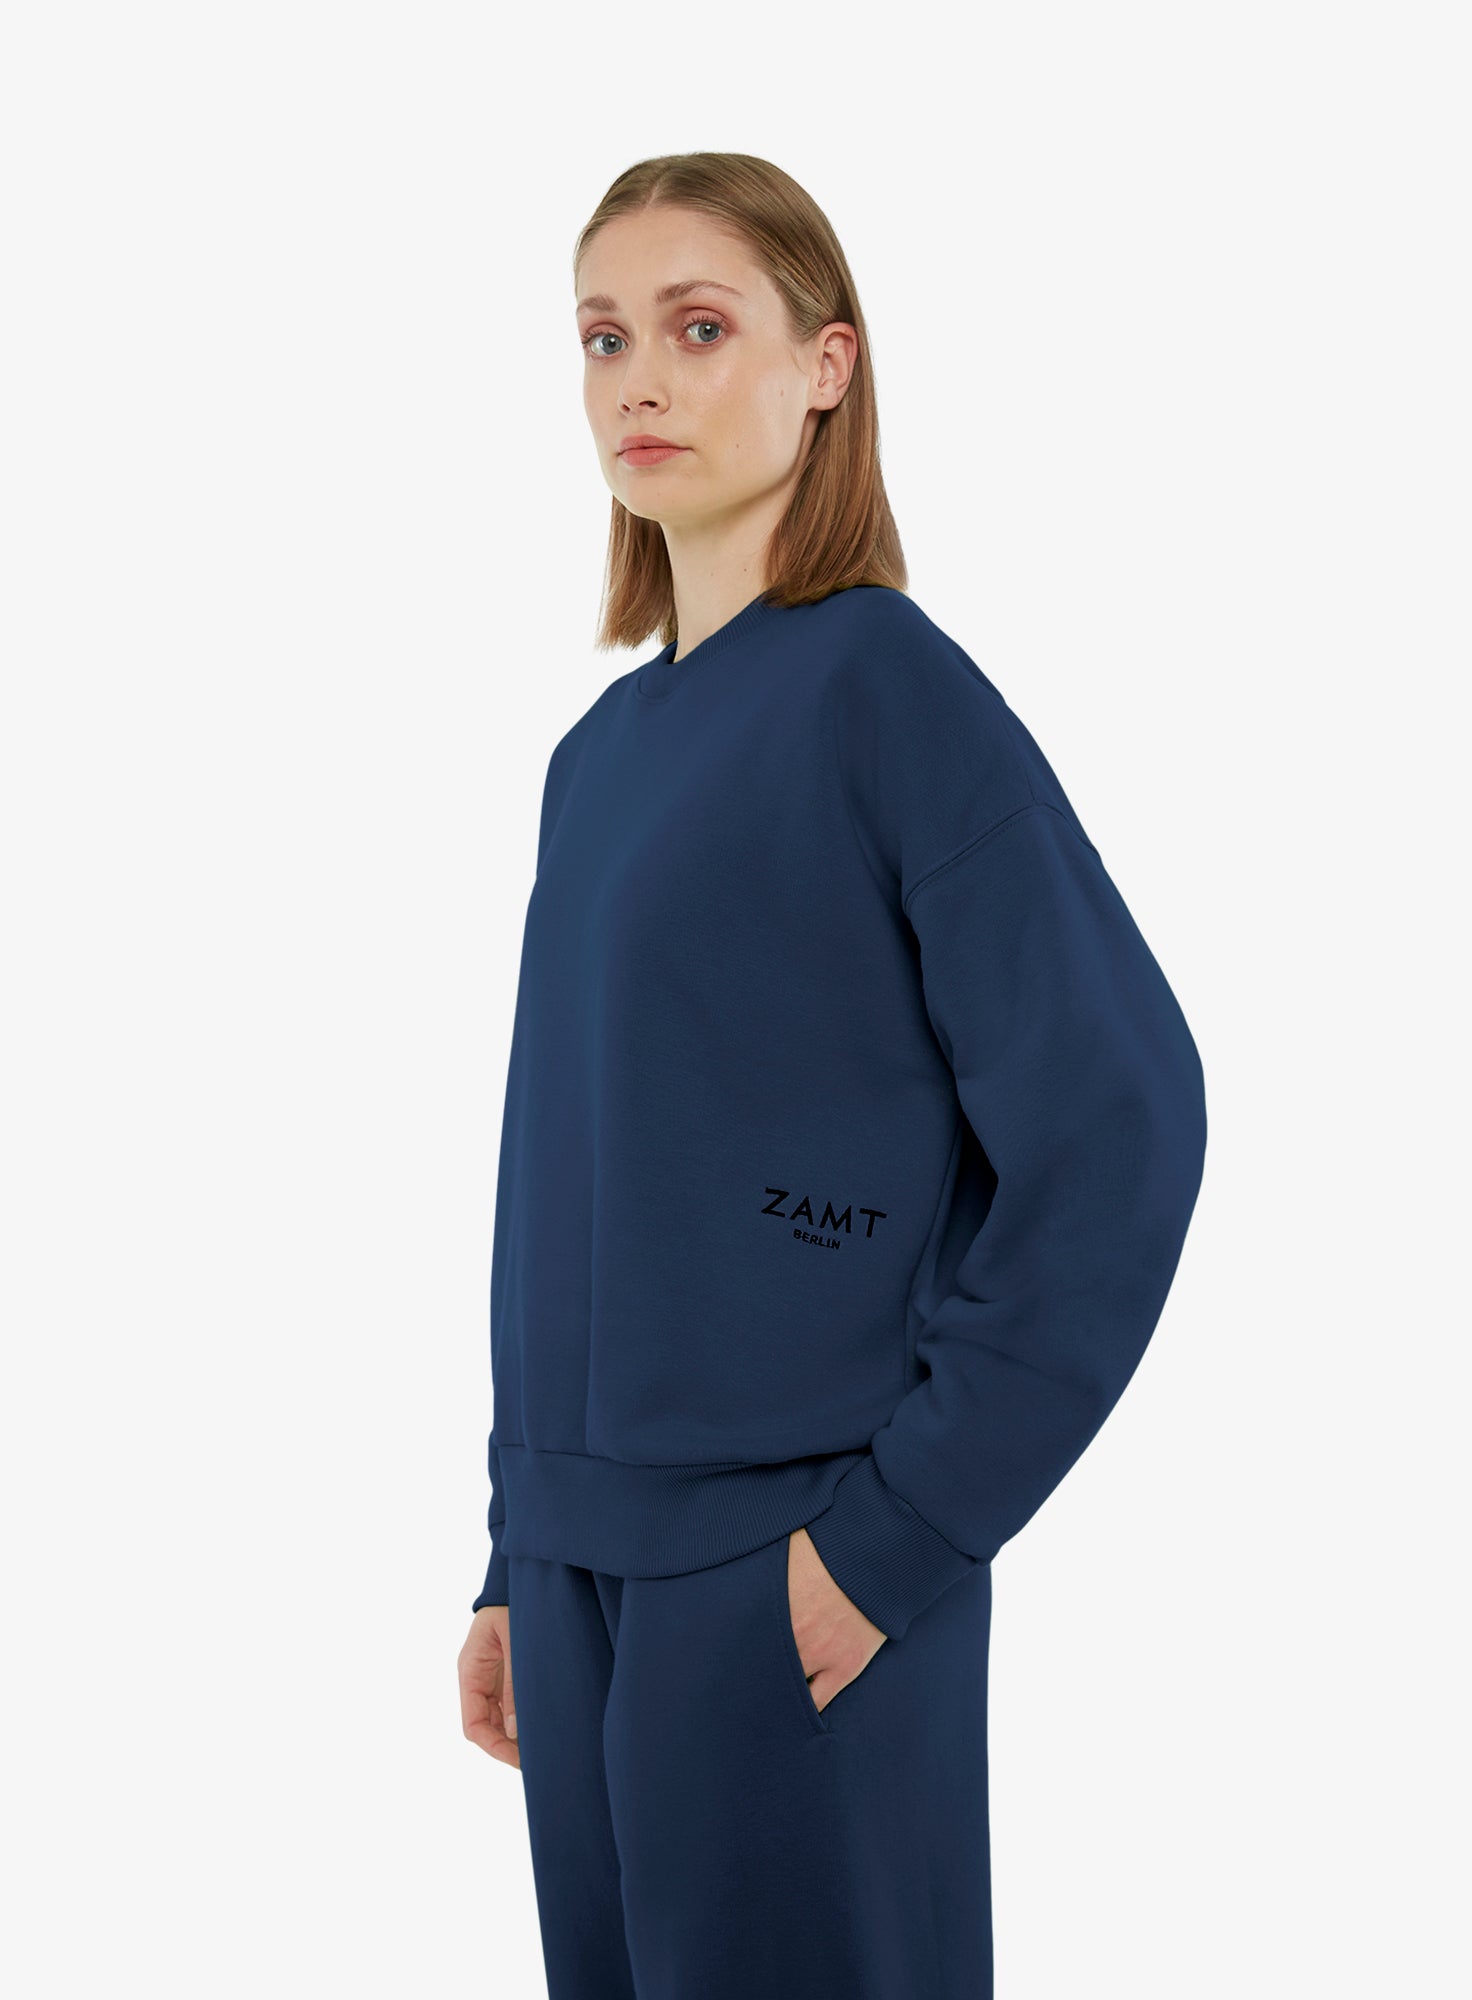 FAVORITE_01_SWEATER_NAVY_Designed_in_Berlin_Made_to_last_Handmade_in_Poland.